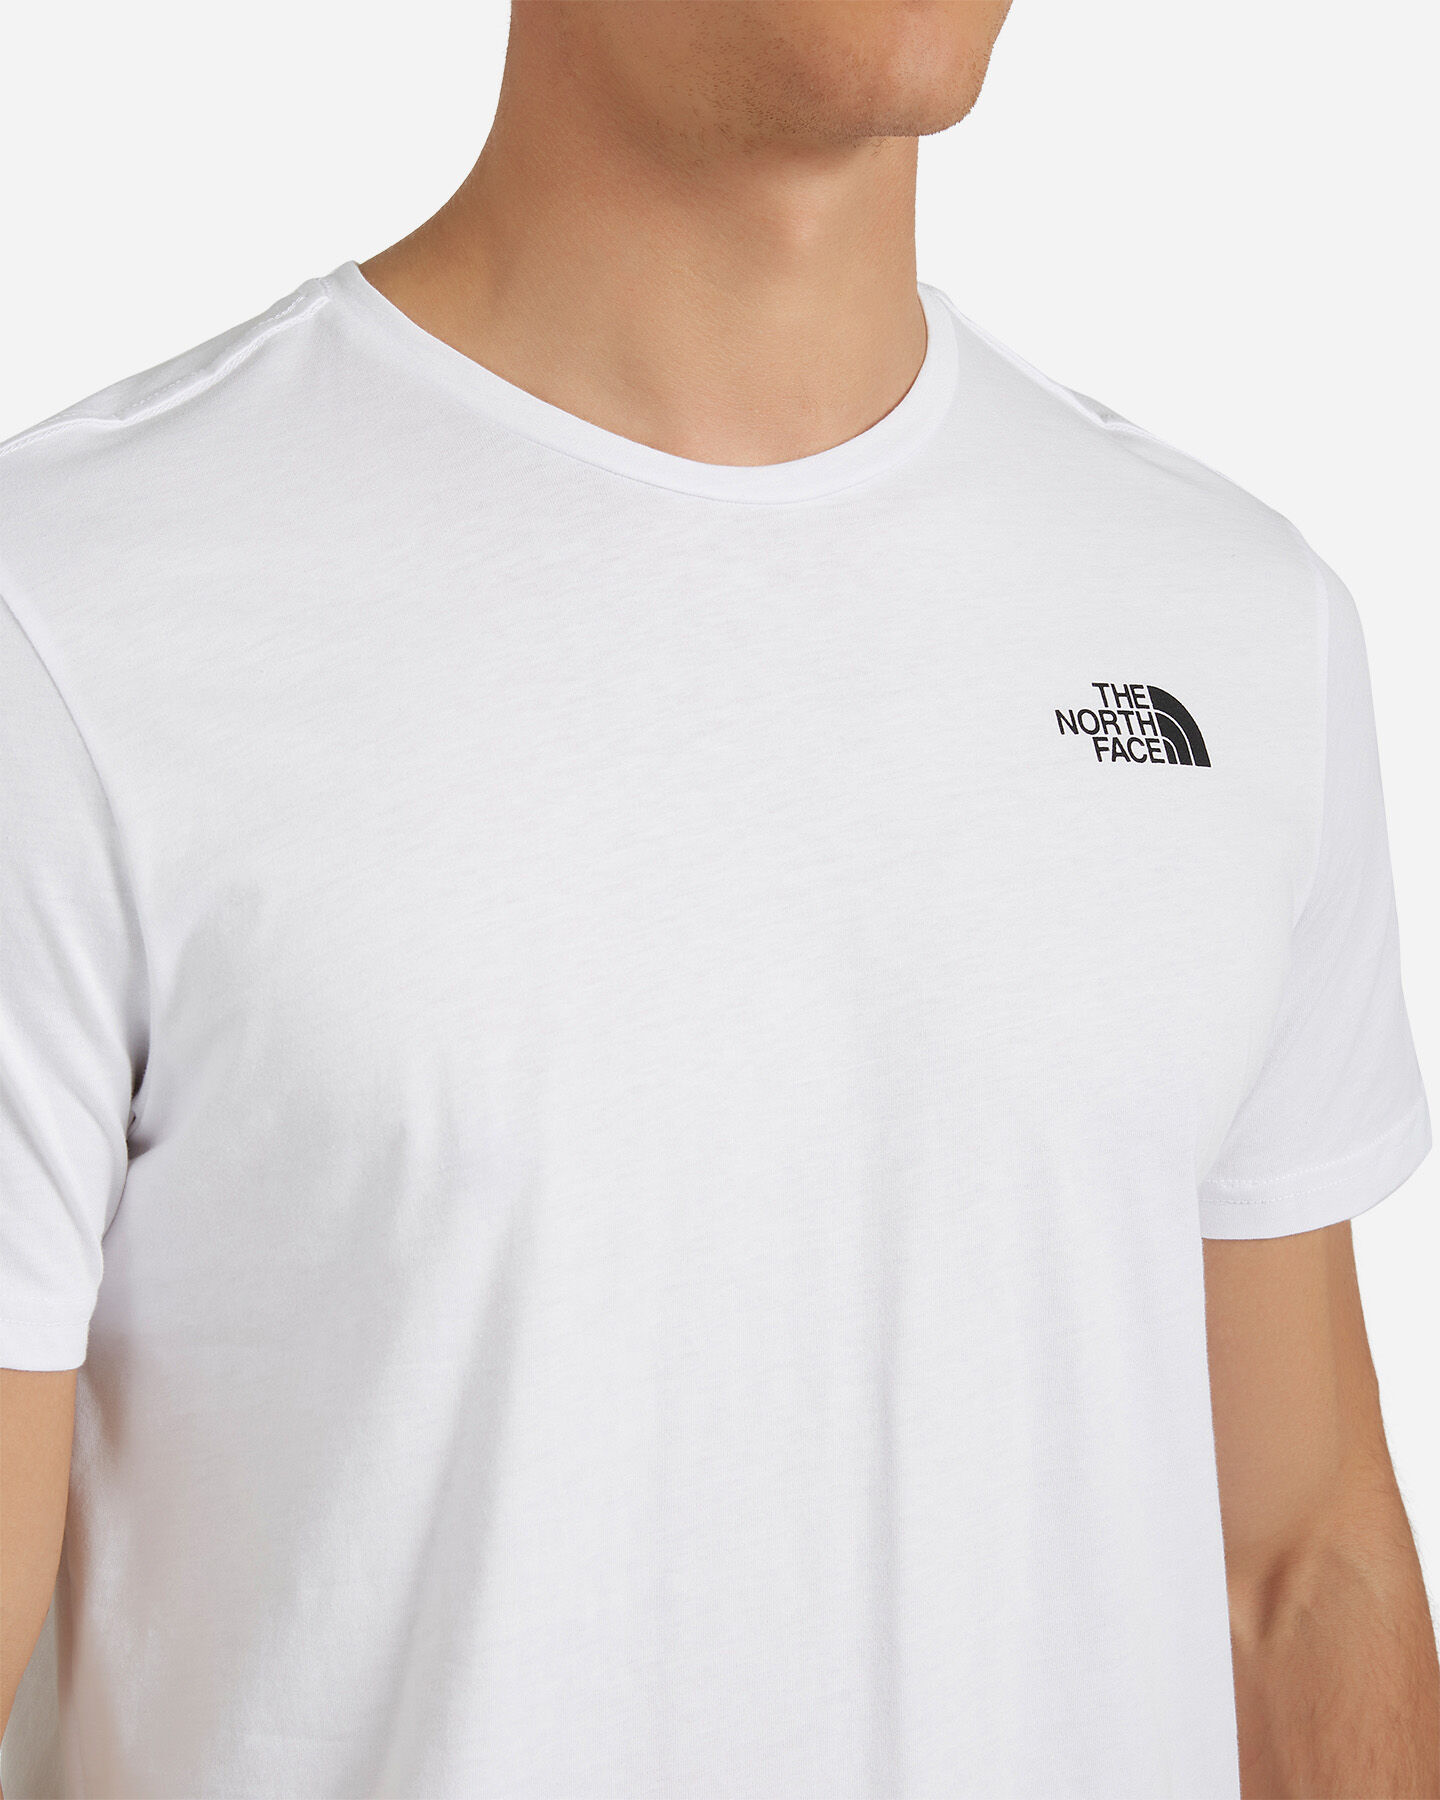  T-Shirt THE NORTH FACE BERARD M S5181620|FN4|S scatto 4